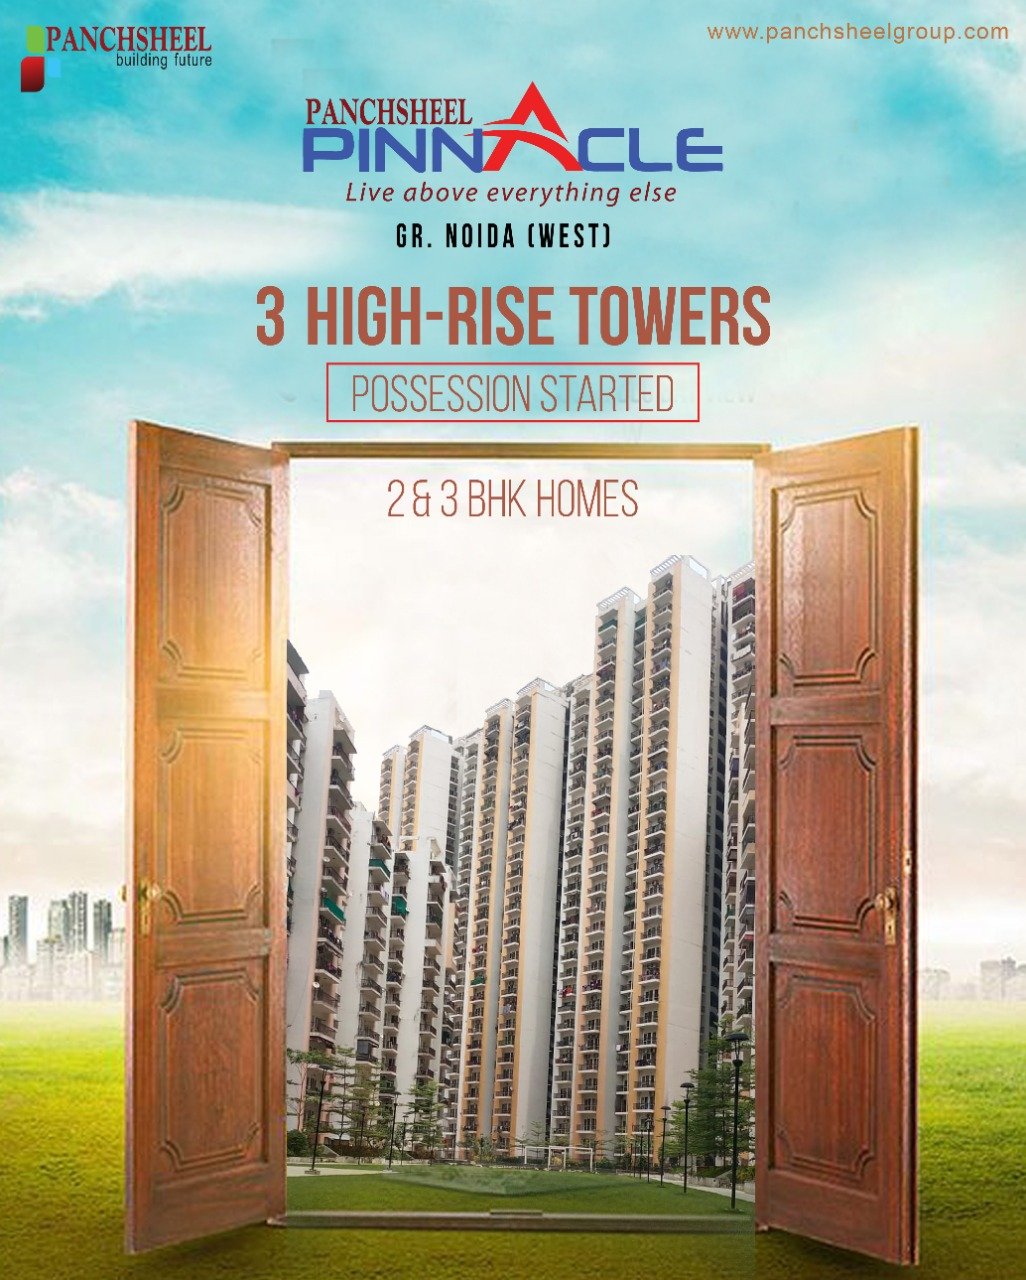 Presenting 3 high rise tower possession started at Panchsheel Pinnacle, Greater Noida Update